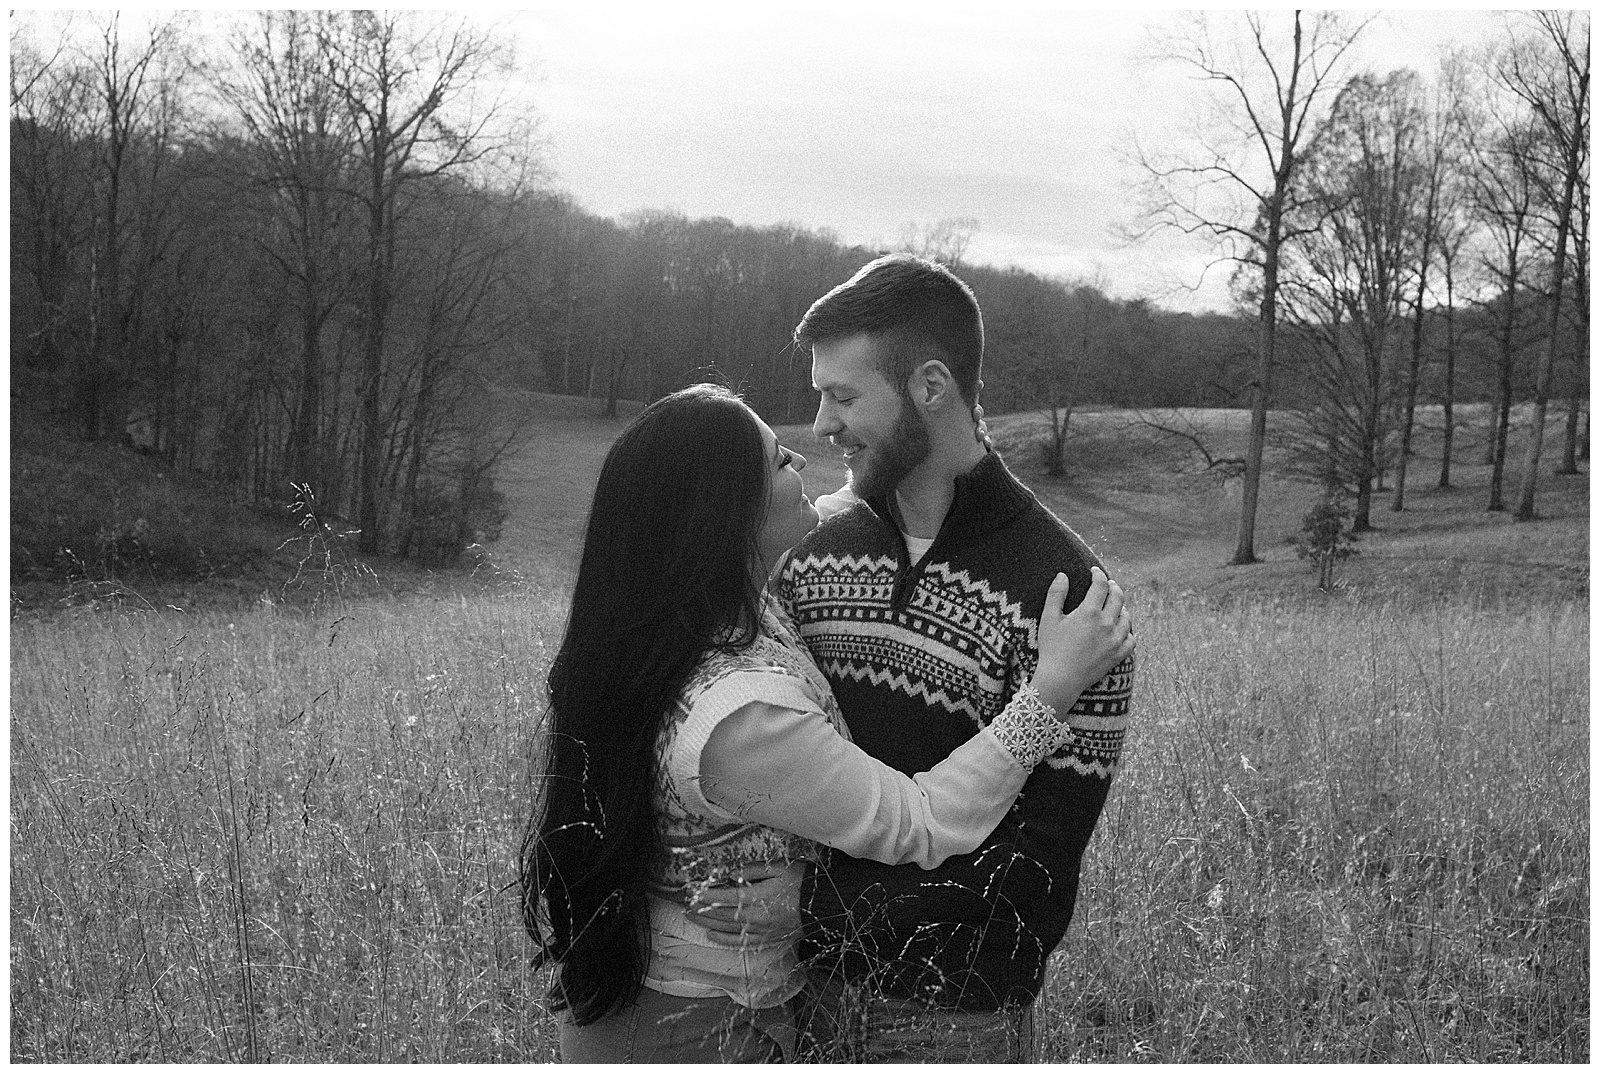 Engaged man and woman snuggled up in meadow at sunset in sweaters for their winter engagement session.